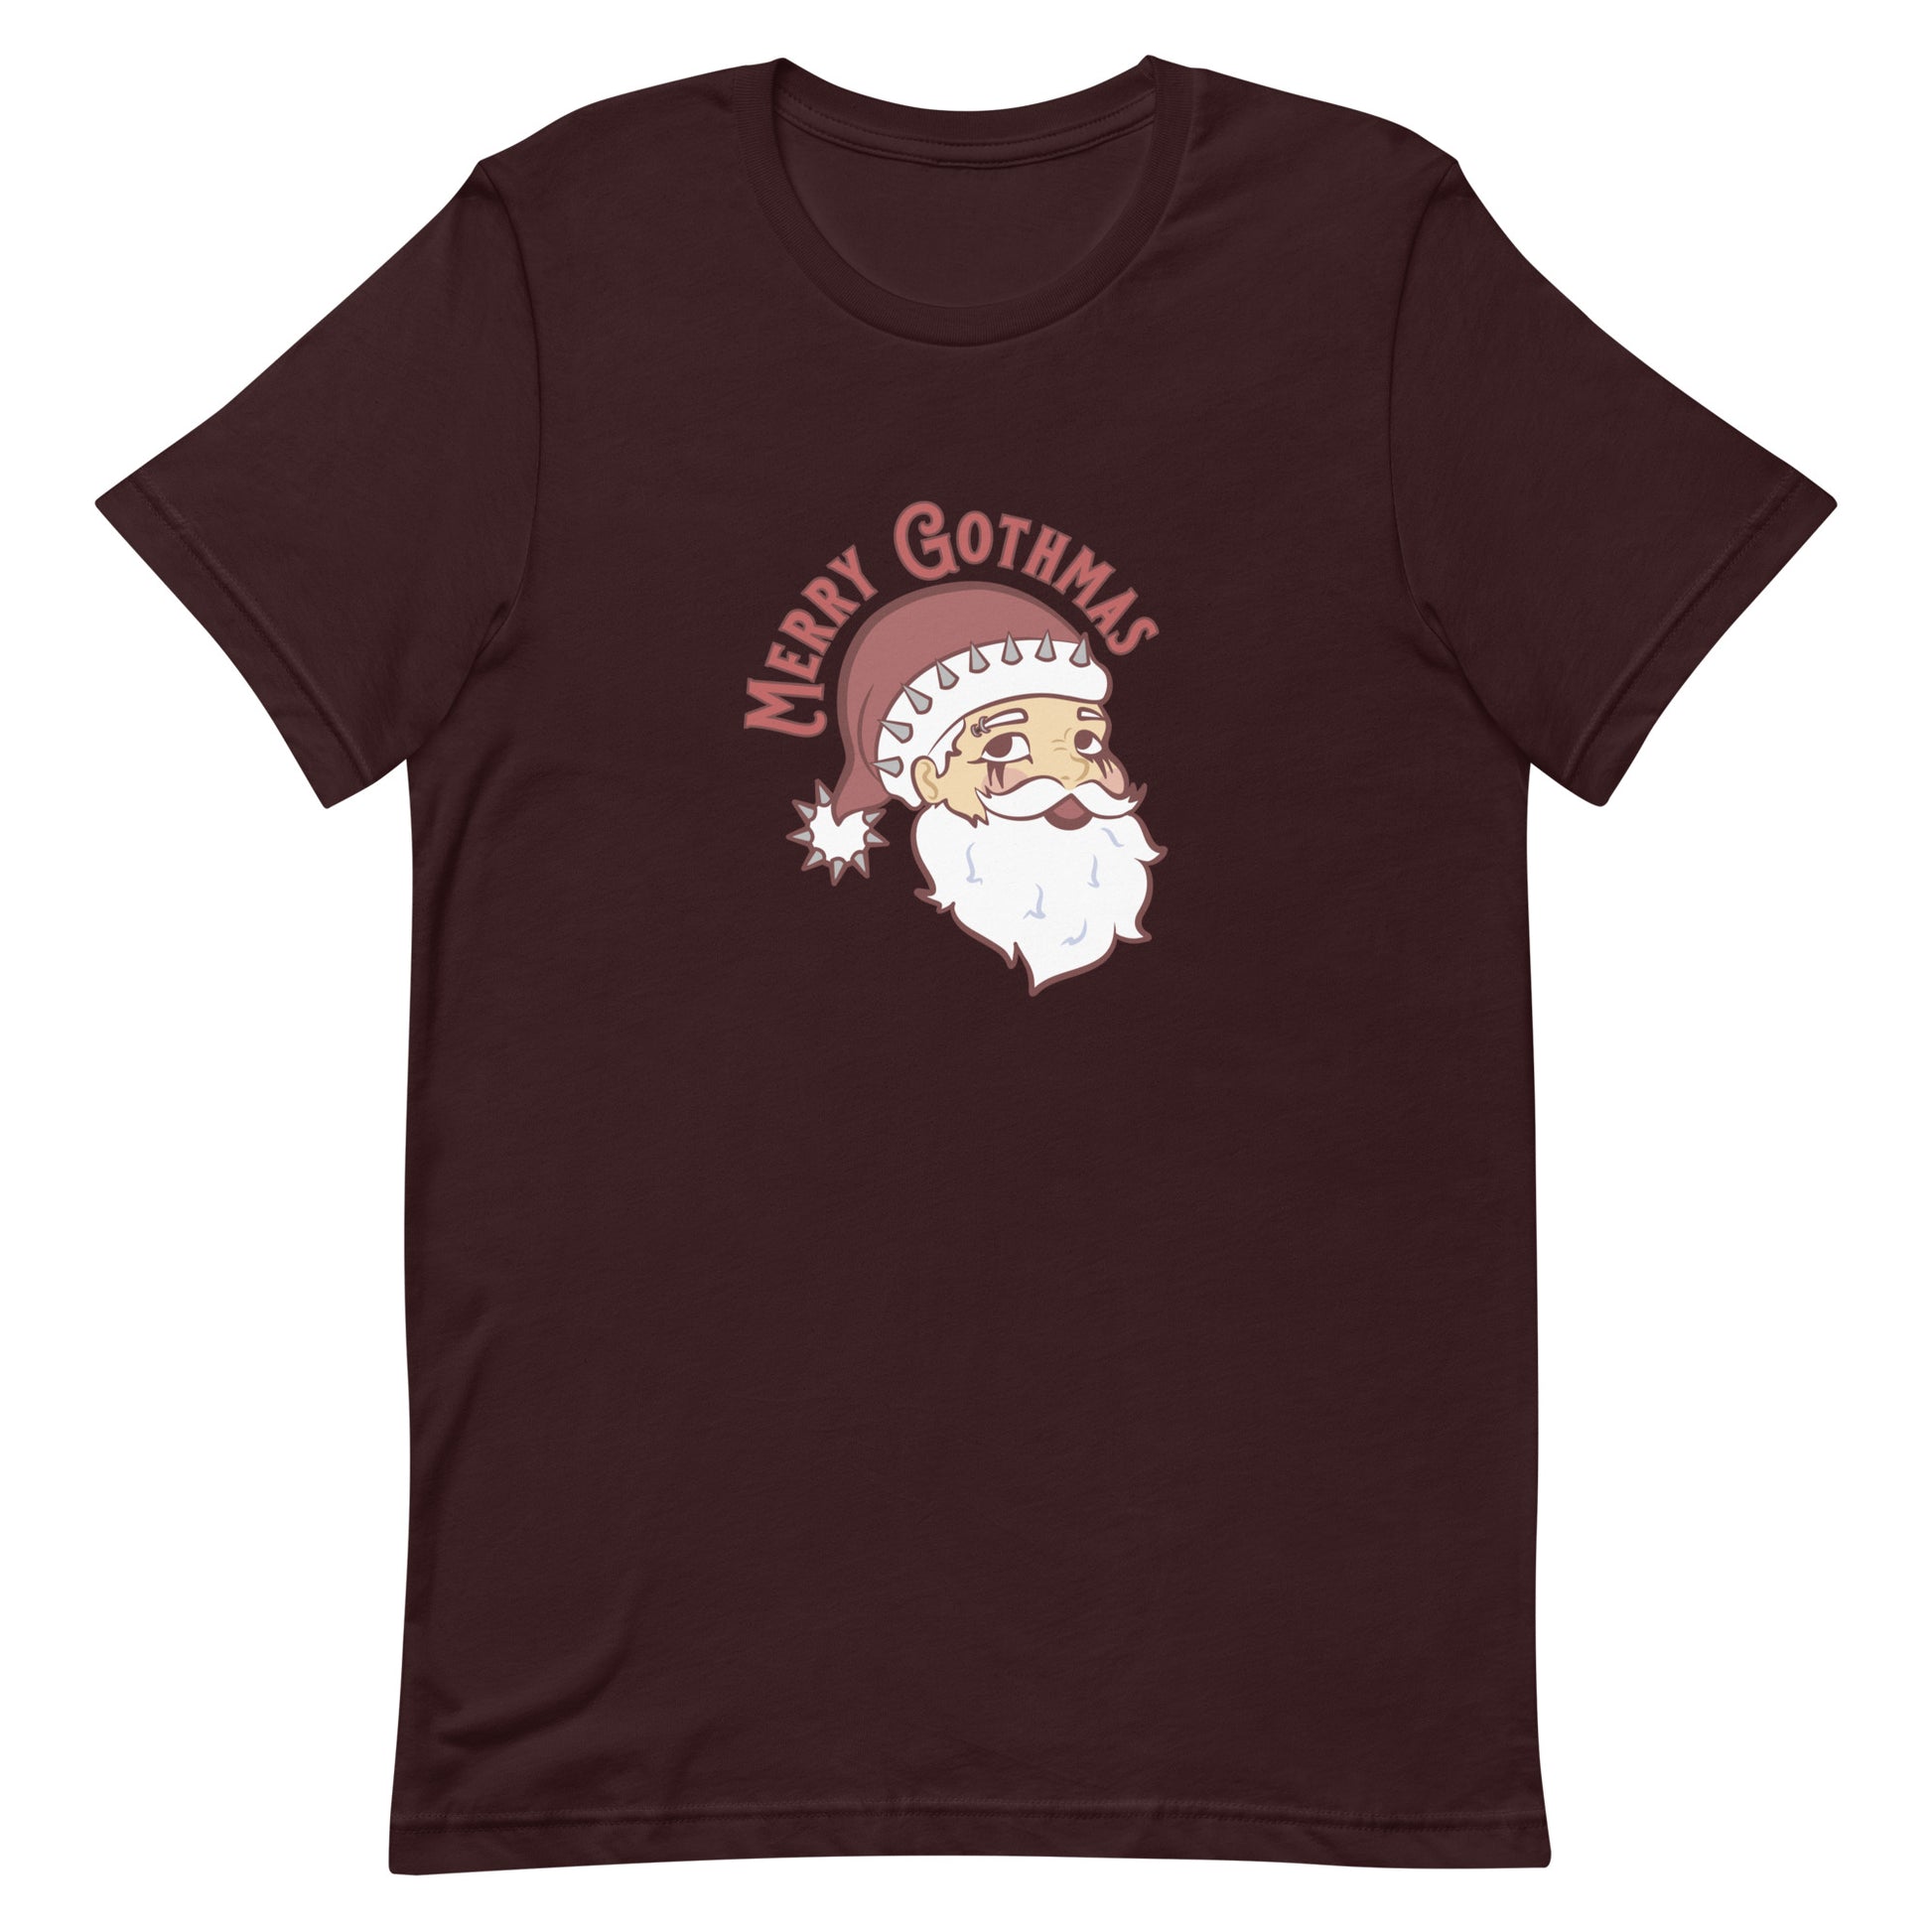 A dark red crewneck t-shirt featuring an image of Santa Claus. Santa is wearing goth-style makeup, and his hat is decorated with spikes. Text above Santa's head reads "Merry Gothmas"